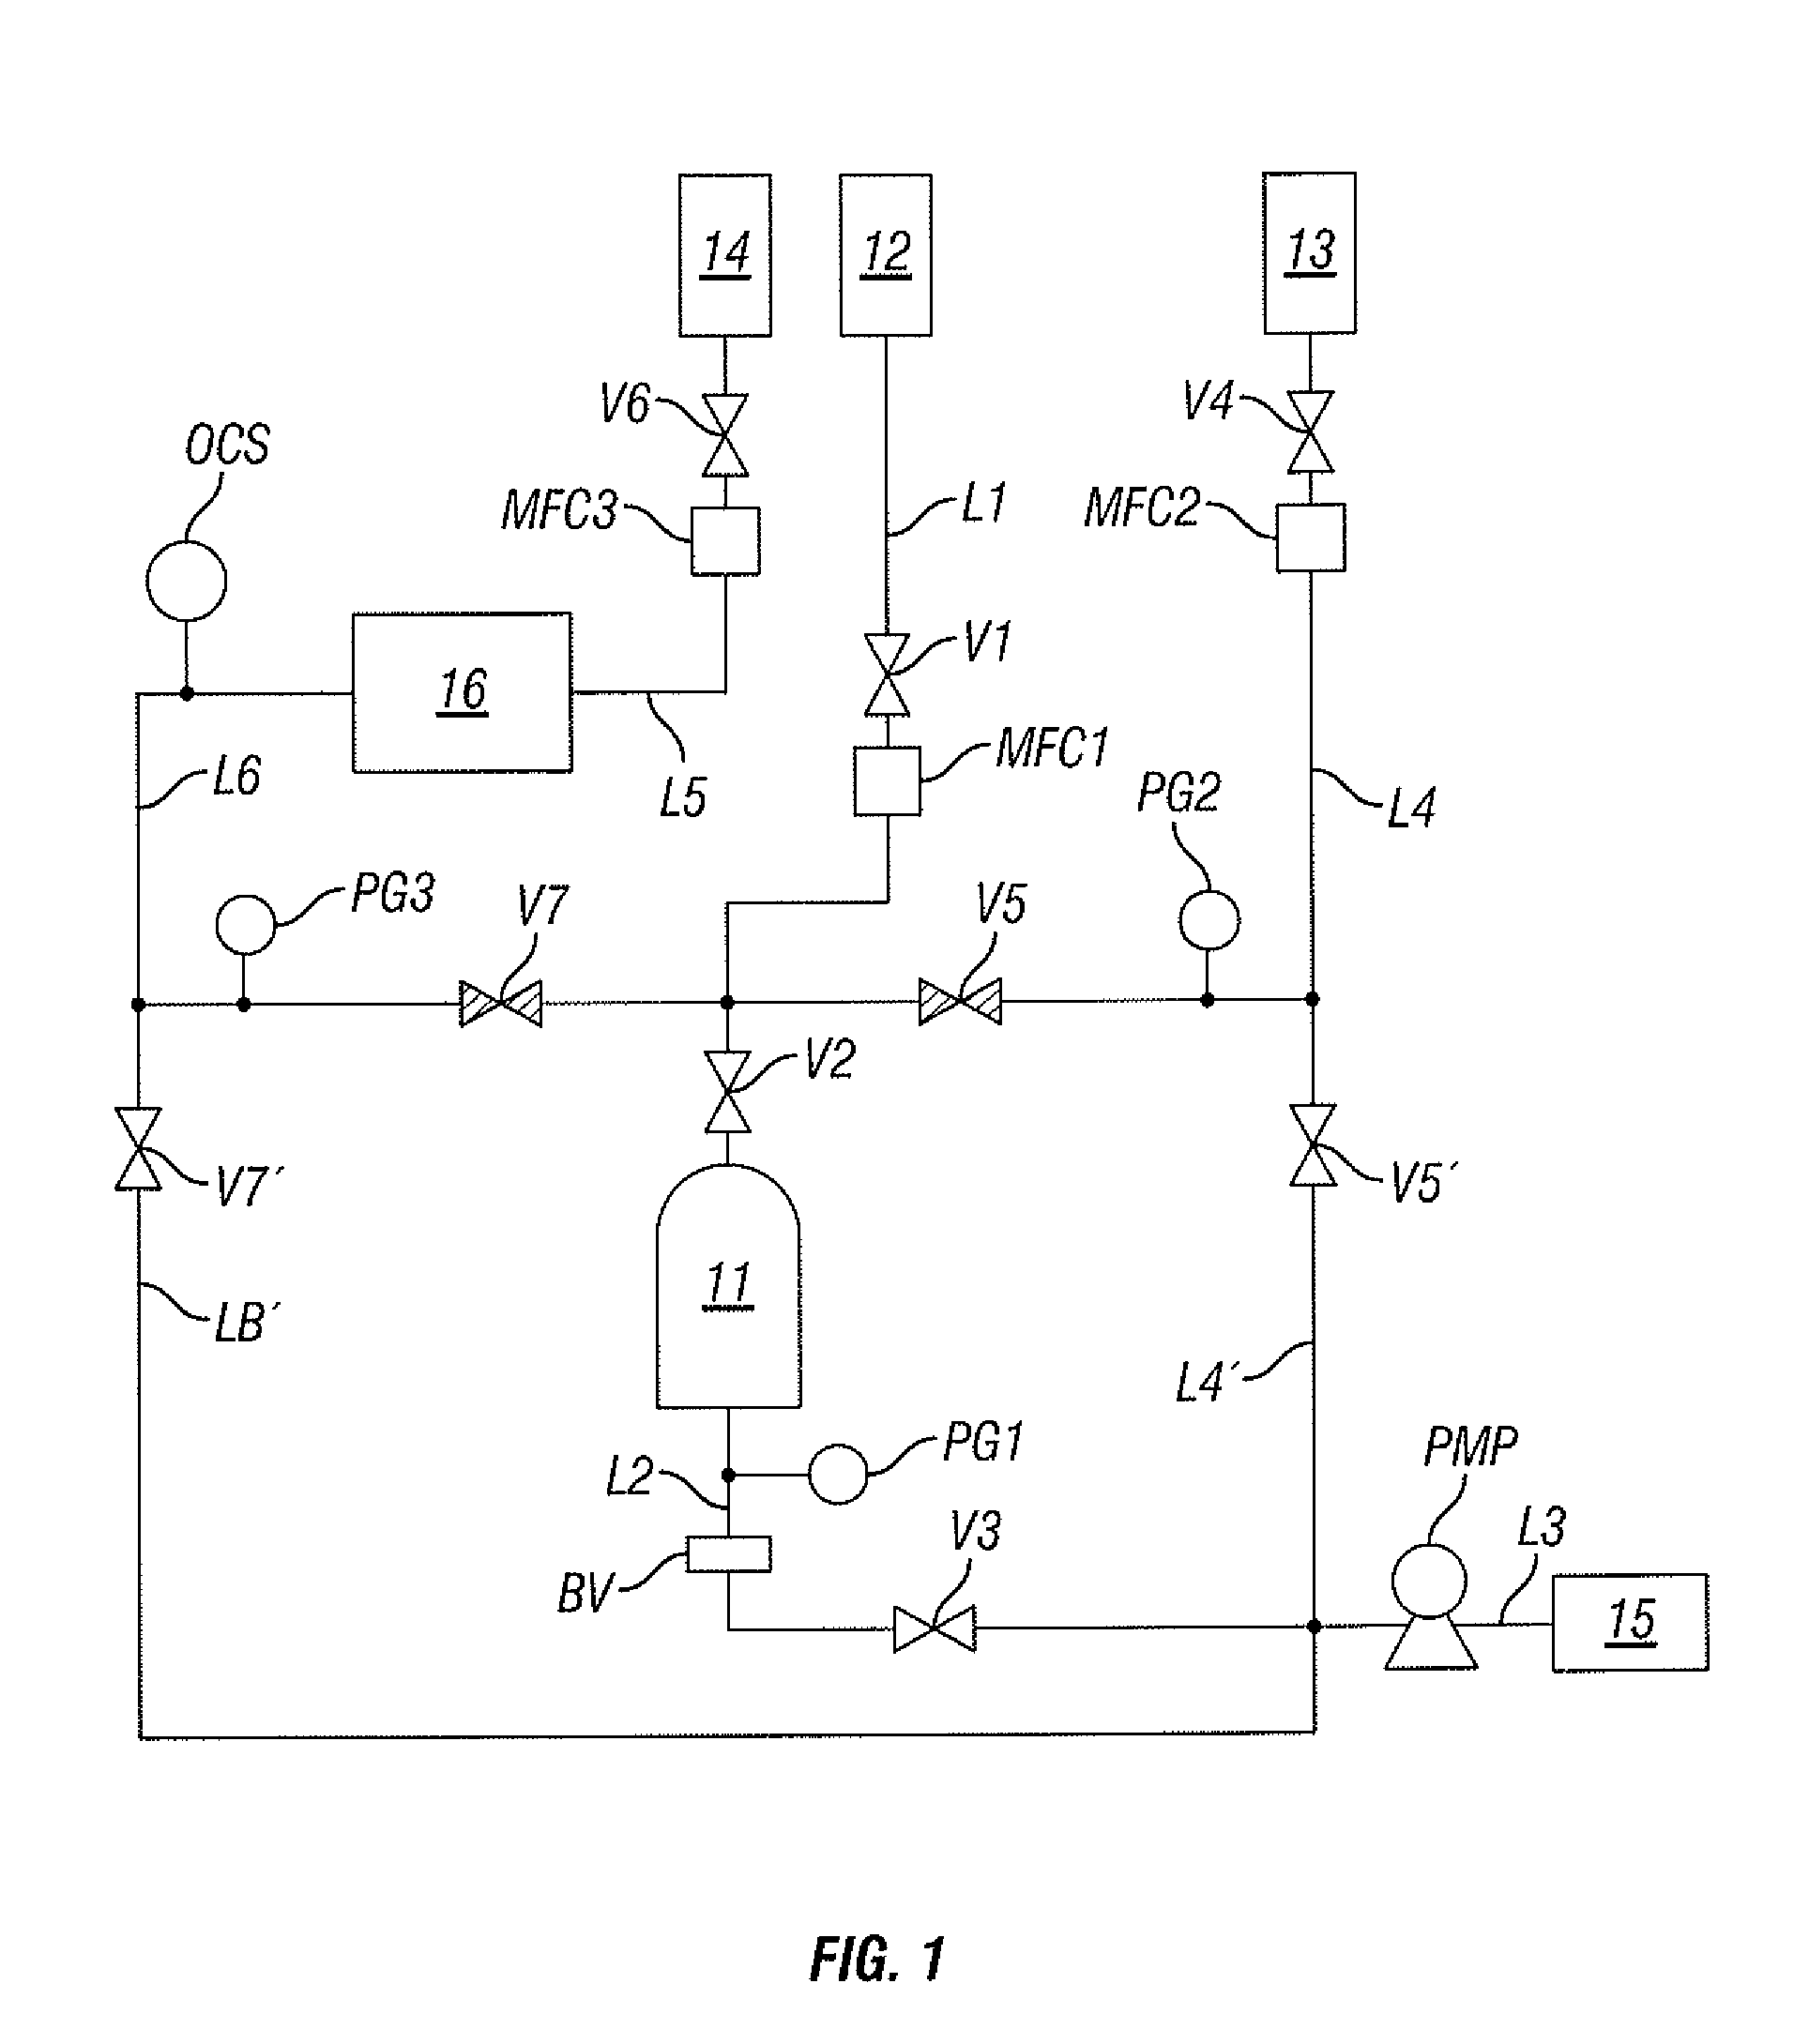 Method of forming silicon-containing films